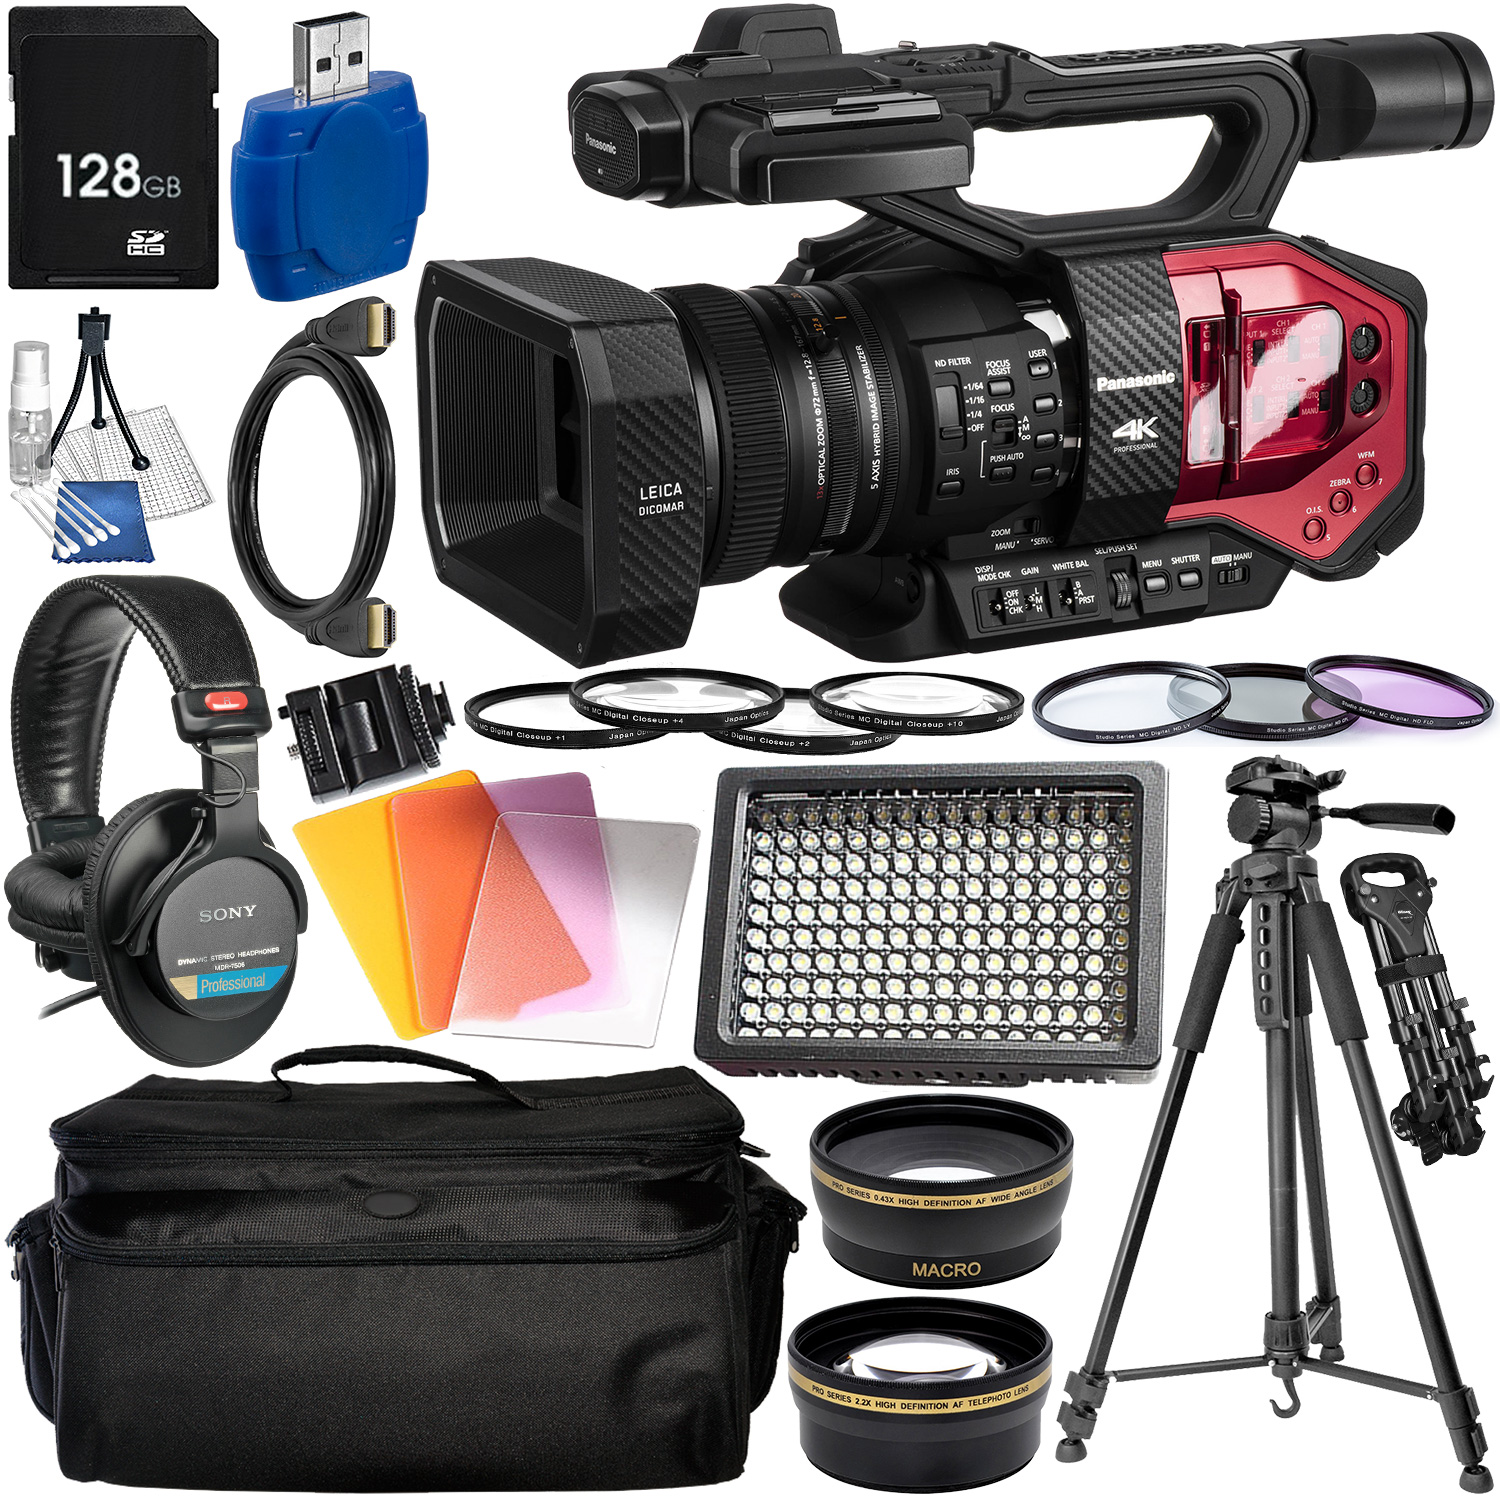 Panasonic AG-DVX200 4K Professional Camcorder with Essential Accessory Bundle